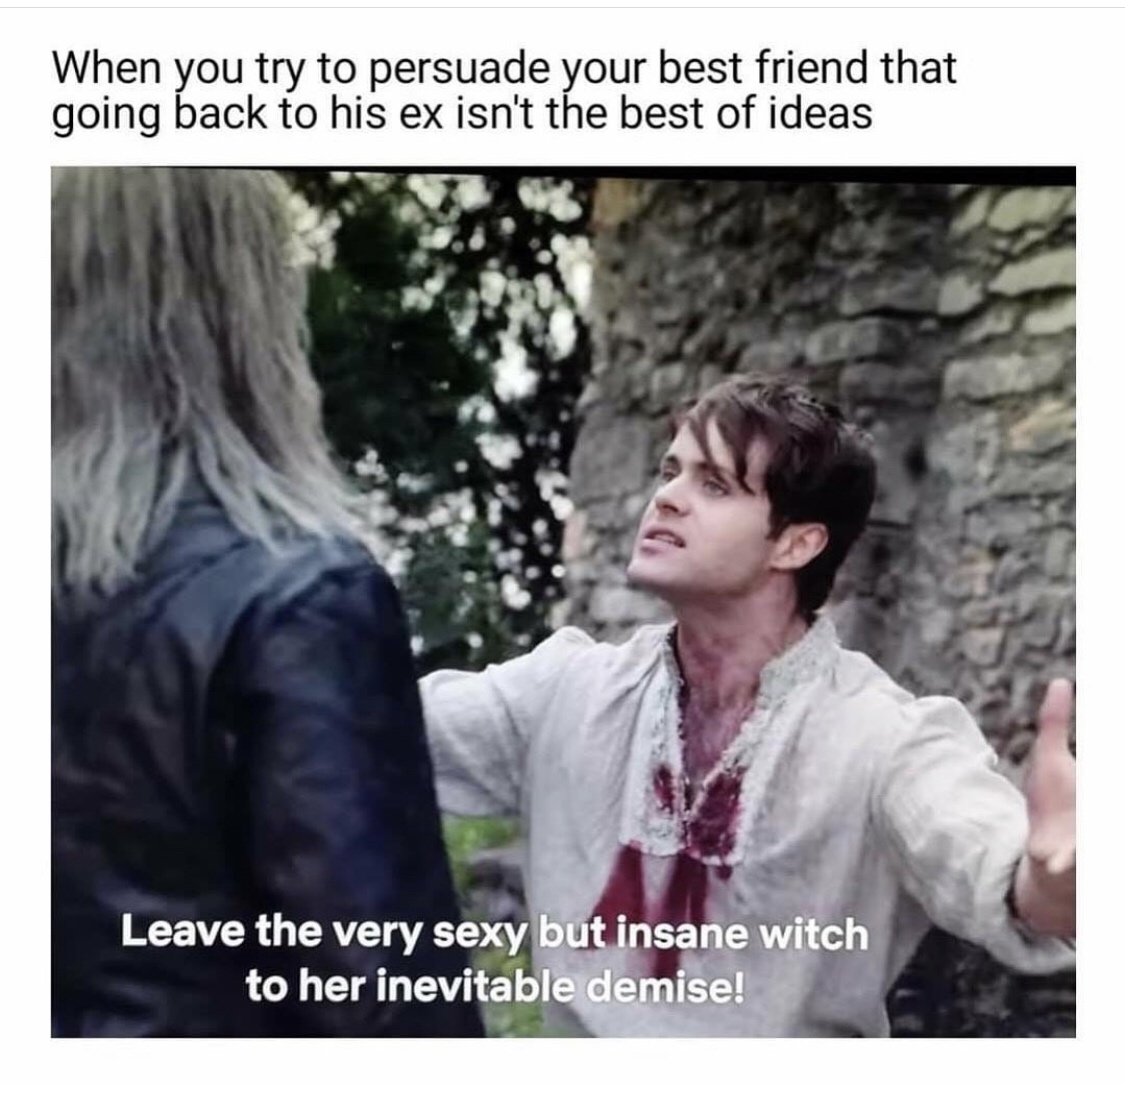 photo caption - When you try to persuade your best friend that going back to his ex isn't the best of ideas Leave the very sexy but insane witch to her inevitable demise!